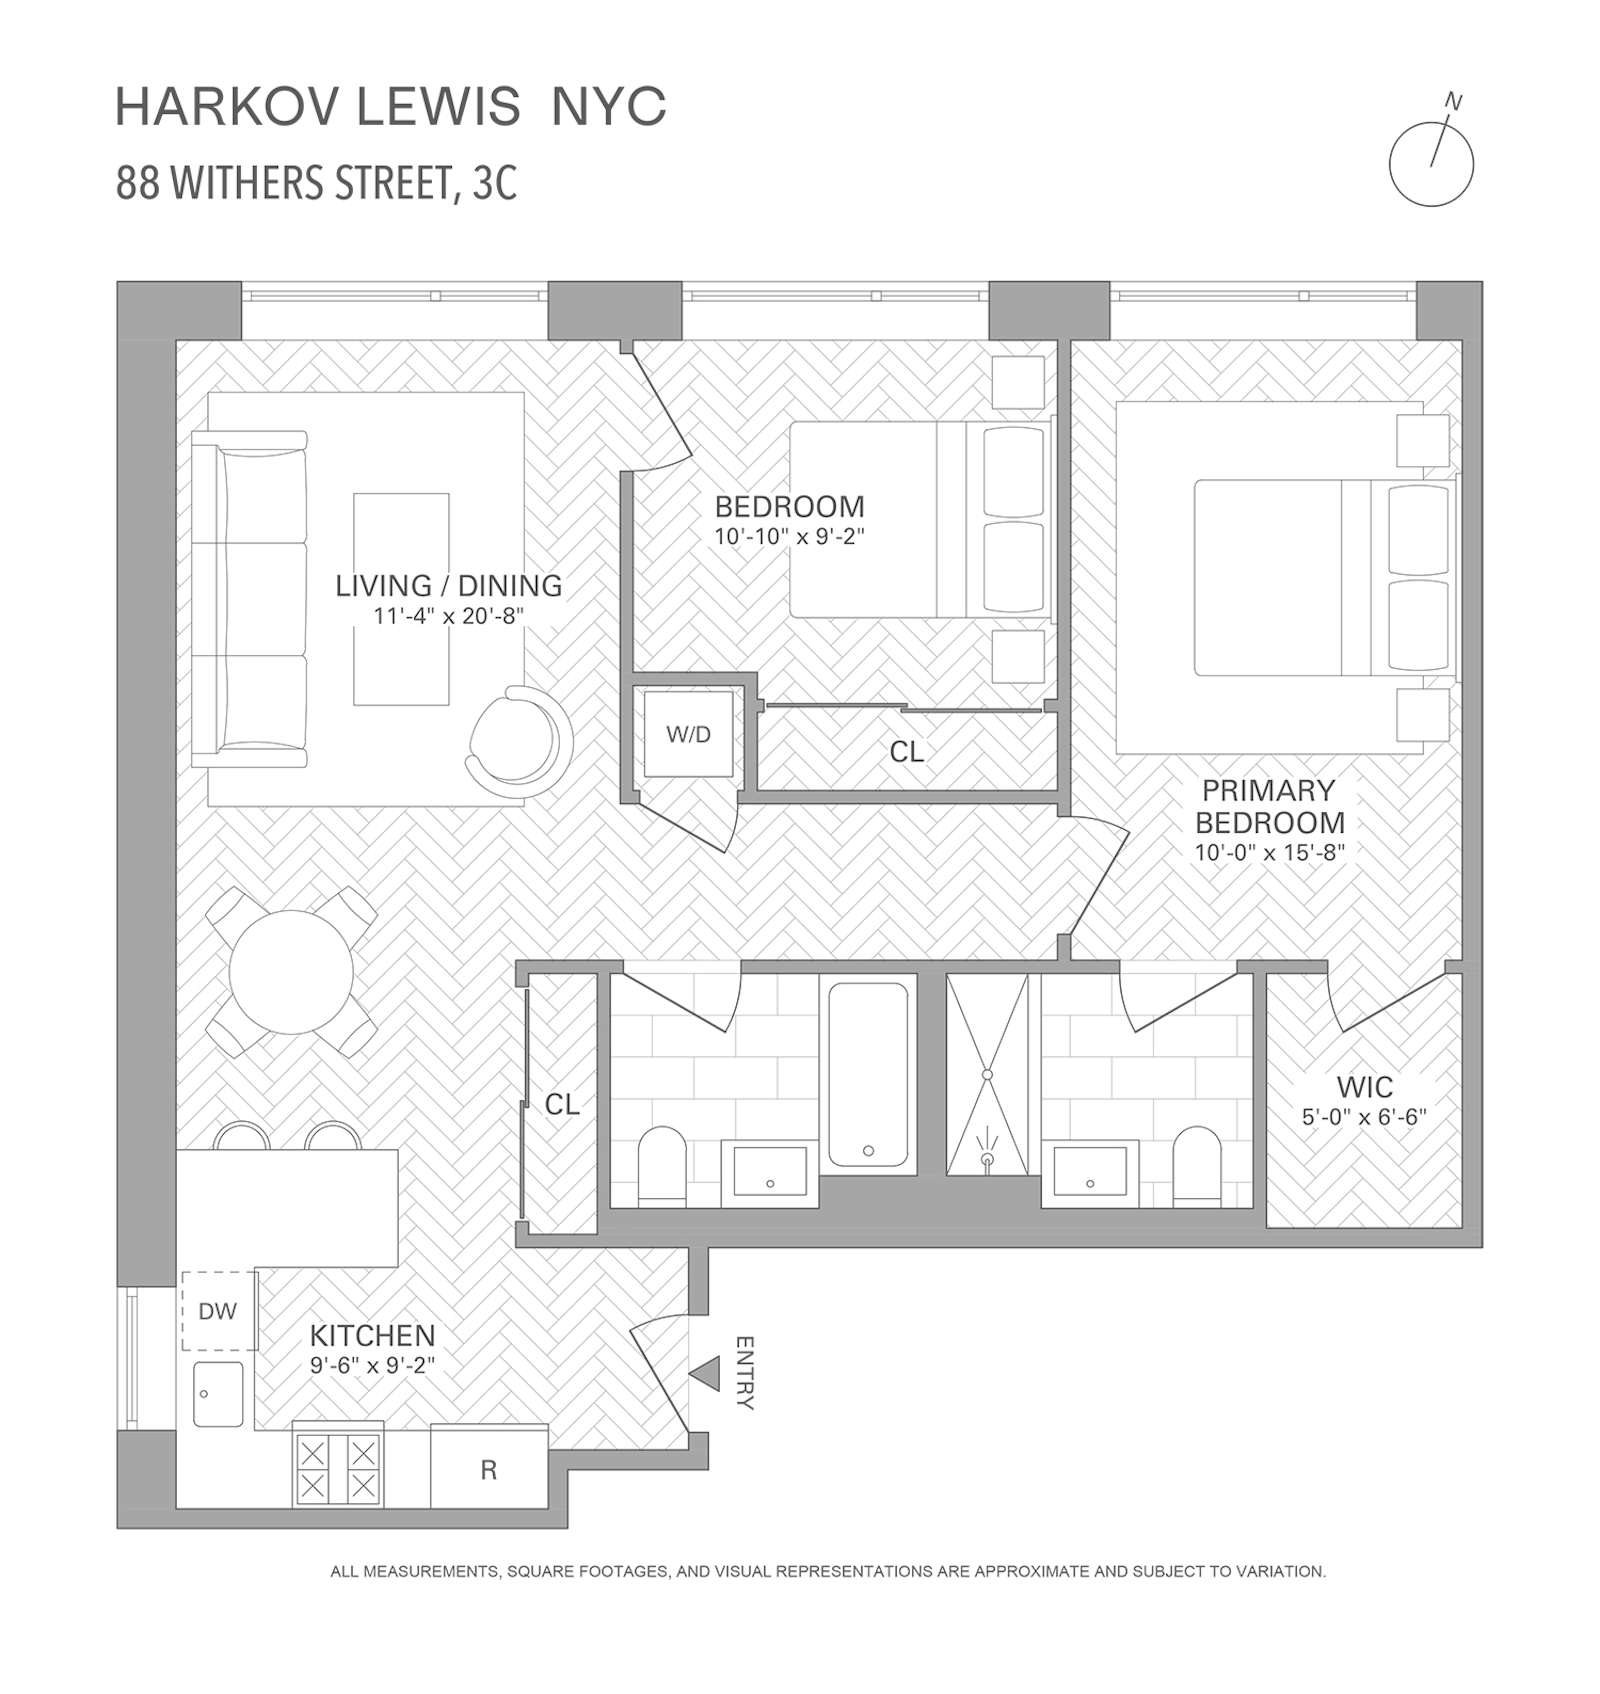 Floorplan for 88 Withers Street, 3C